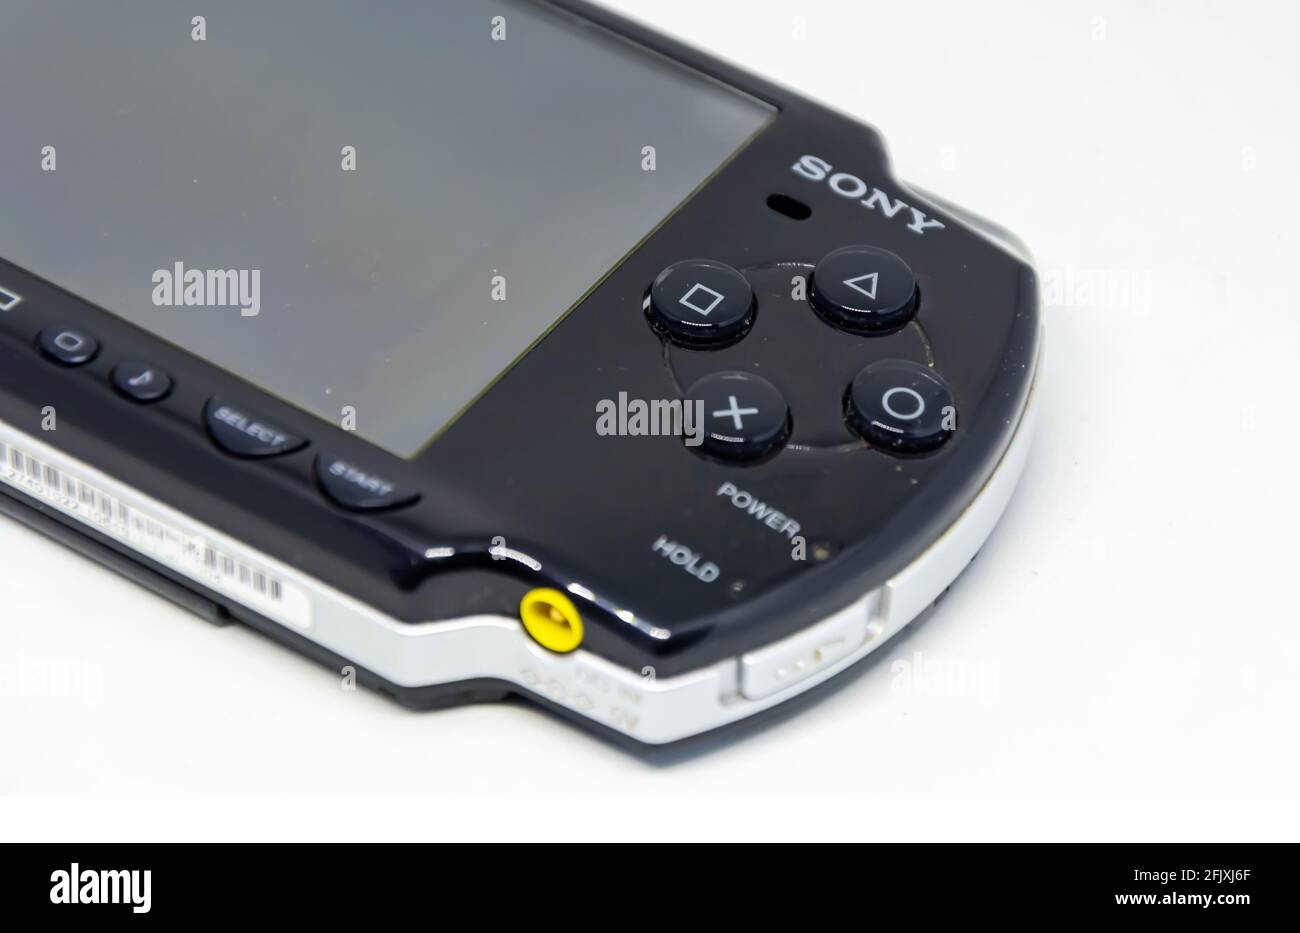 Rome, Italy, April 9th 2021: Side view of a Sony PlayStation Portable (PSP). PSP is a handheld game console developed and marketed by Sony. Mobile ent Stock Photo